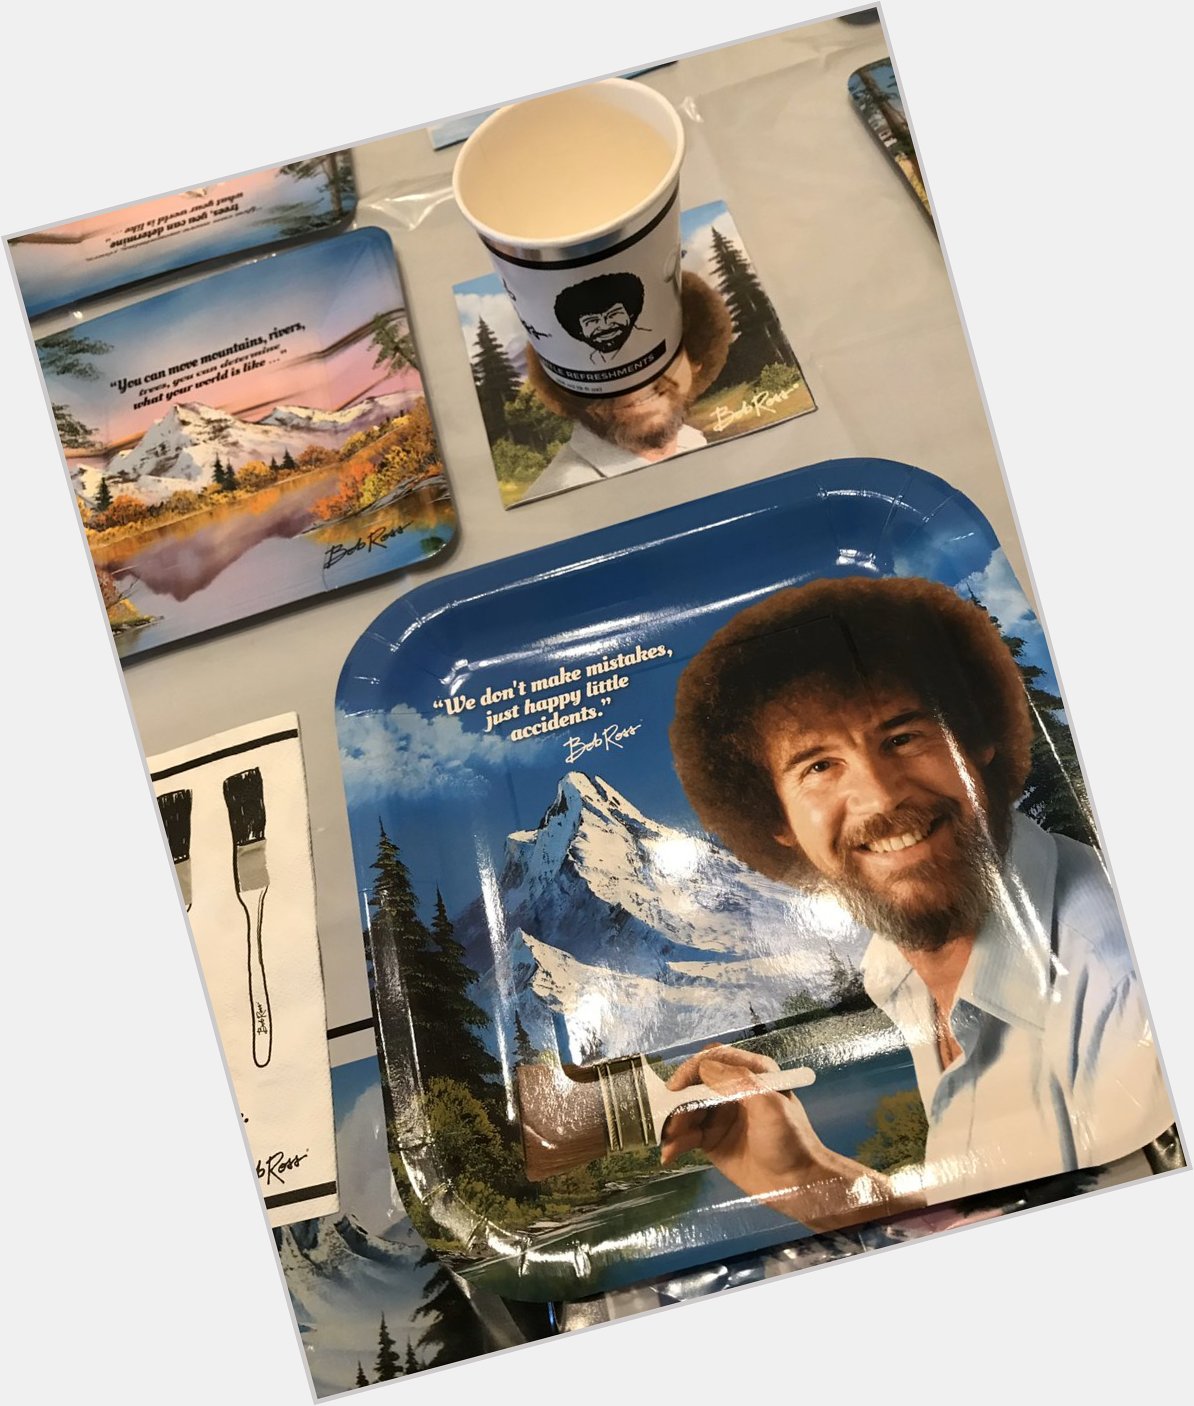 Love that my now 10 year old loves Bob Ross. Happy Birthday, kid. Make those happy trees  